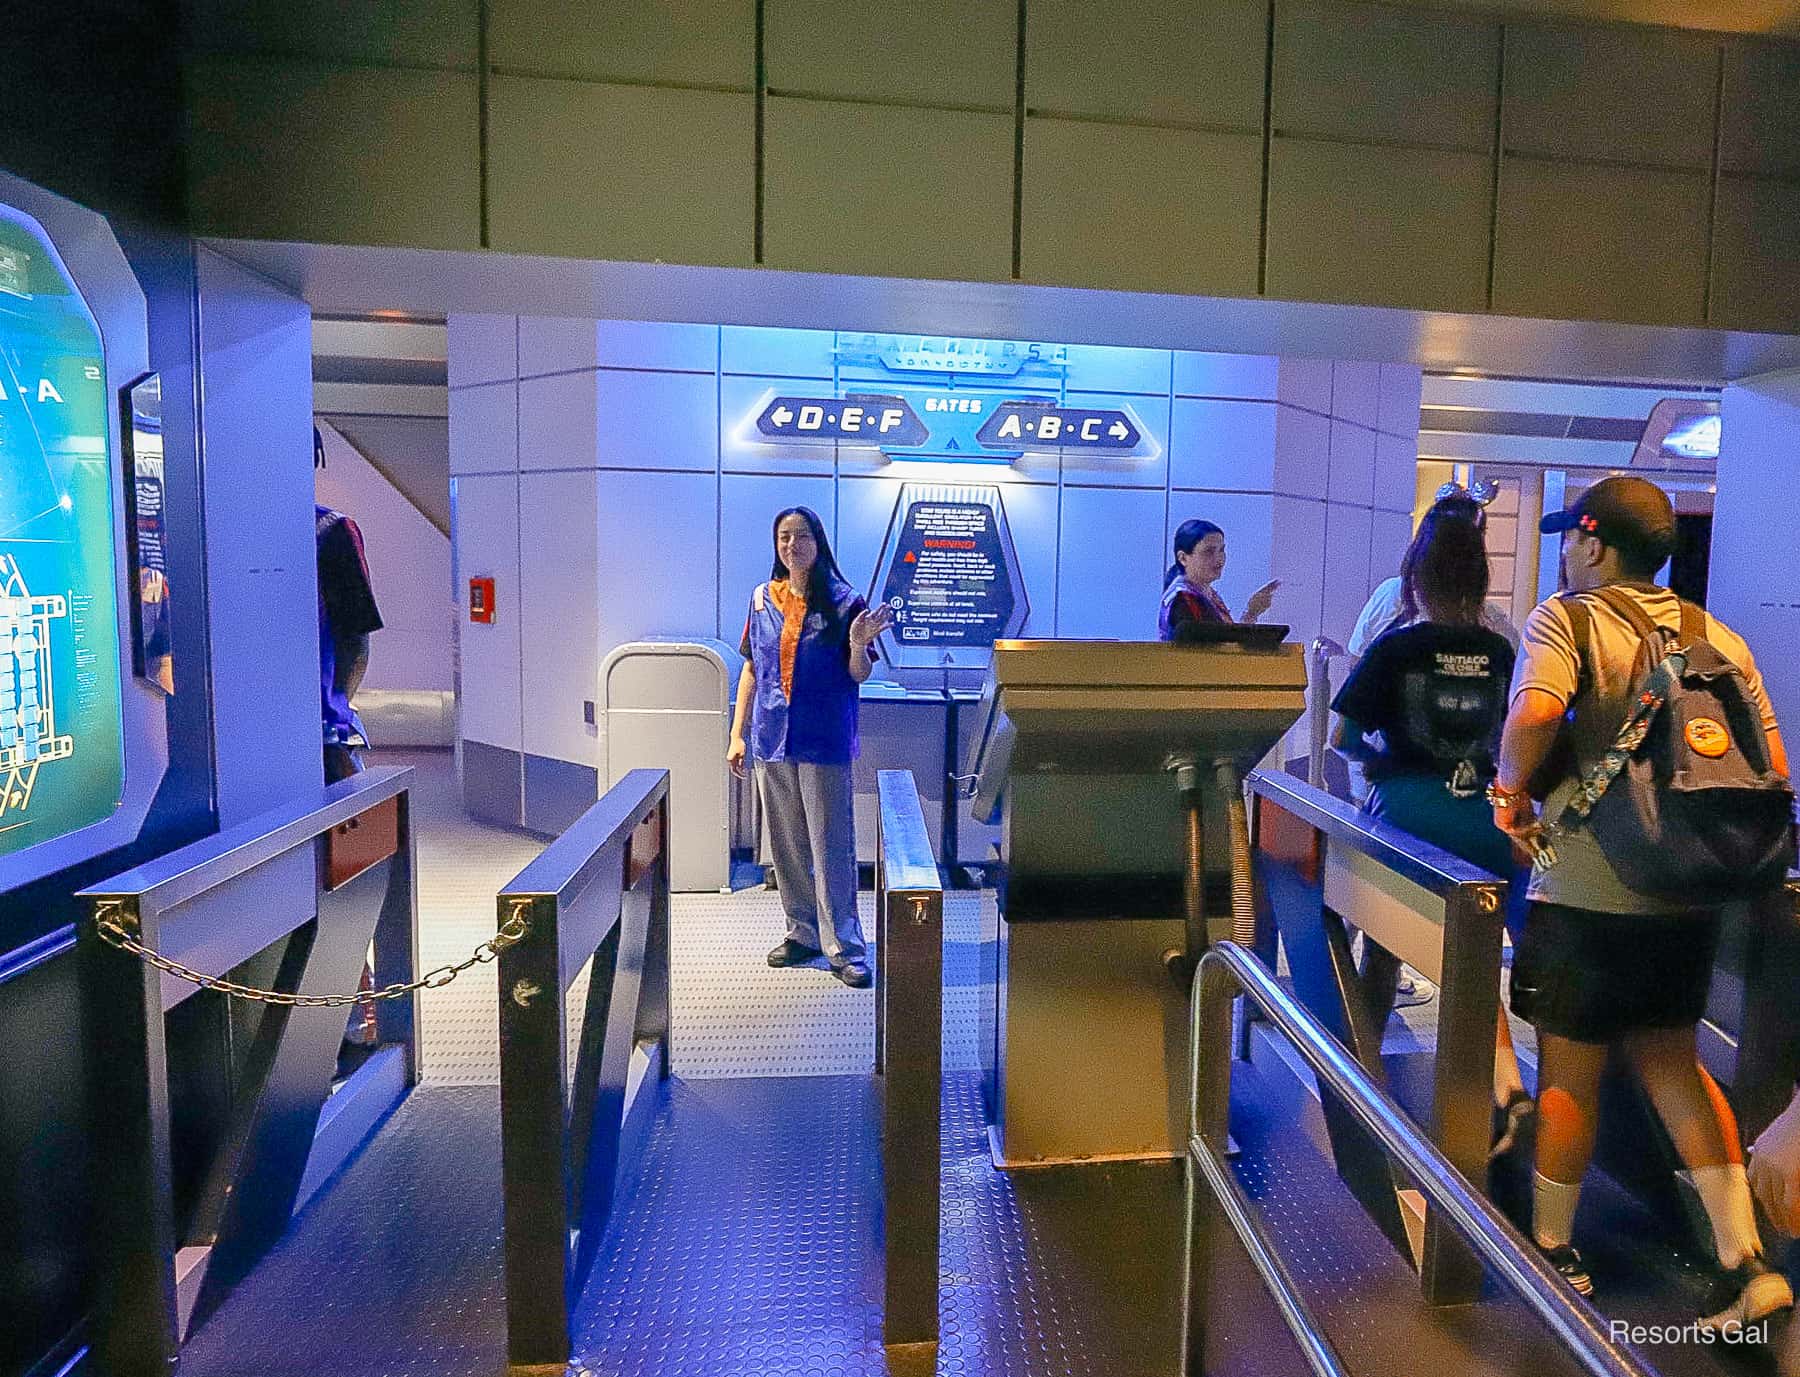 top of the queue where guests are assigned a theater to ride Star Tours 